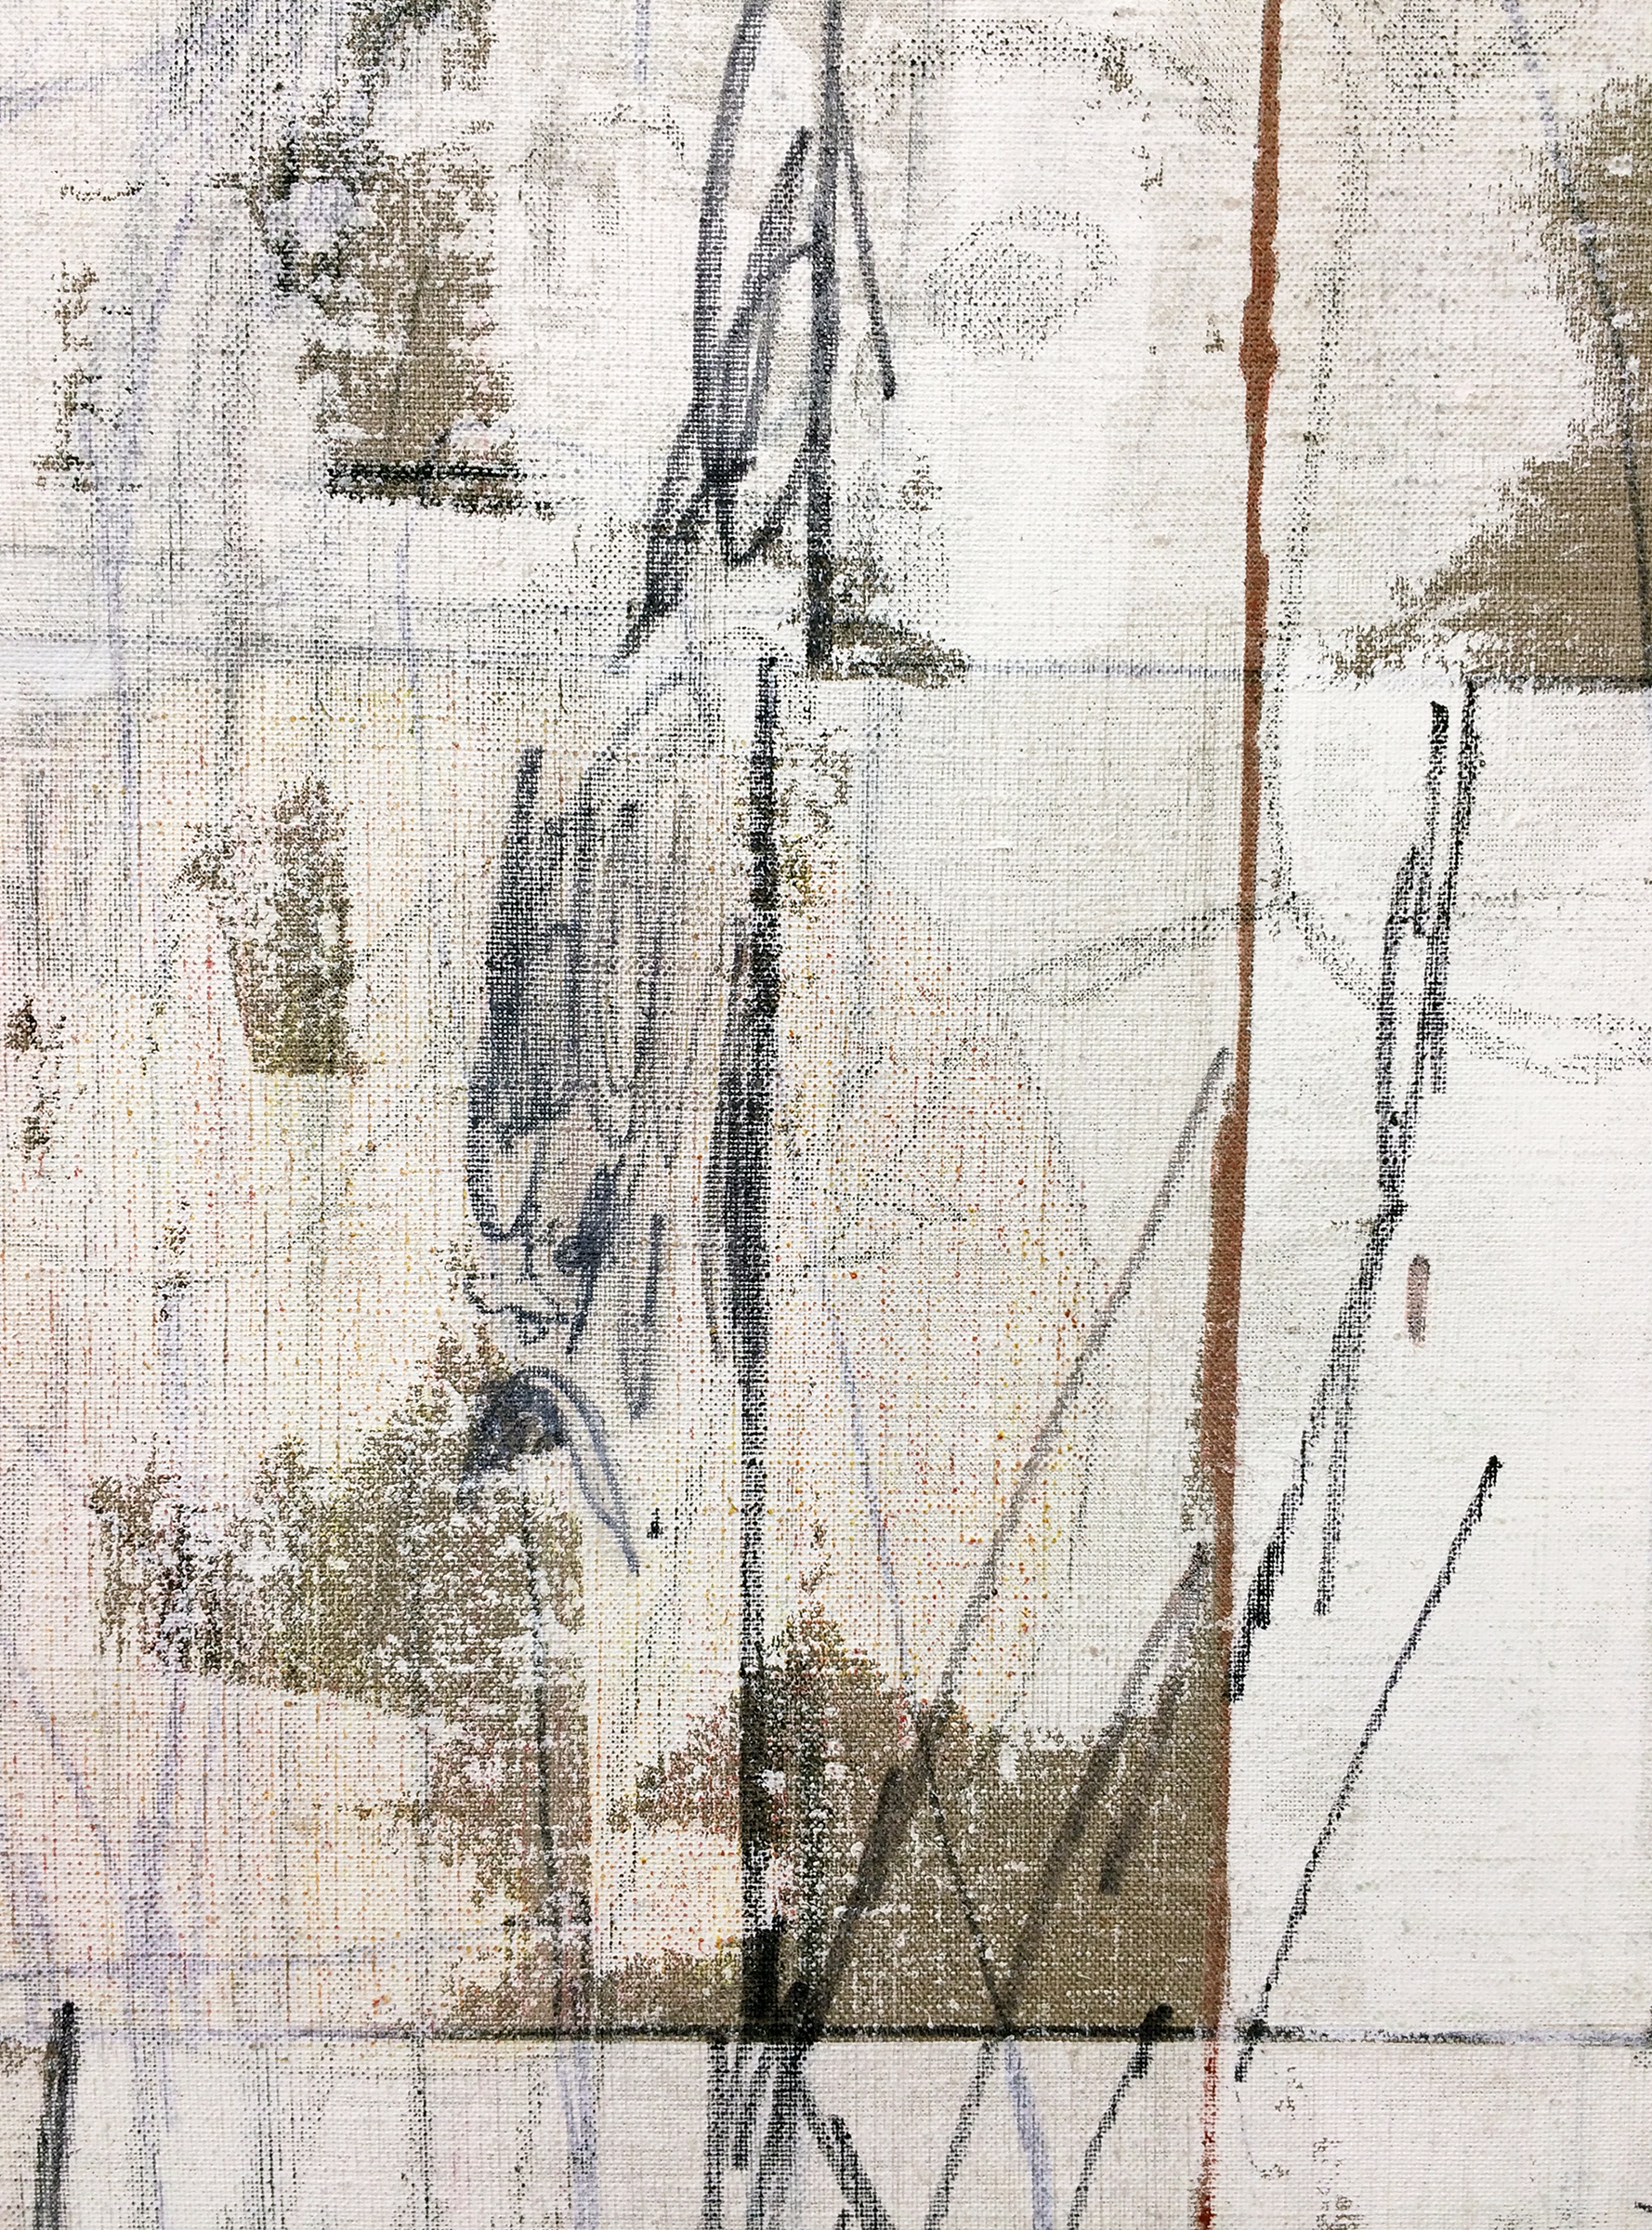   TED GAHL  (detail)&nbsp; Commuters (Strangers' Hands Touching, White) , 2015, oil, acrylic, graphite and colored pencil on linen, 48" x 36" 